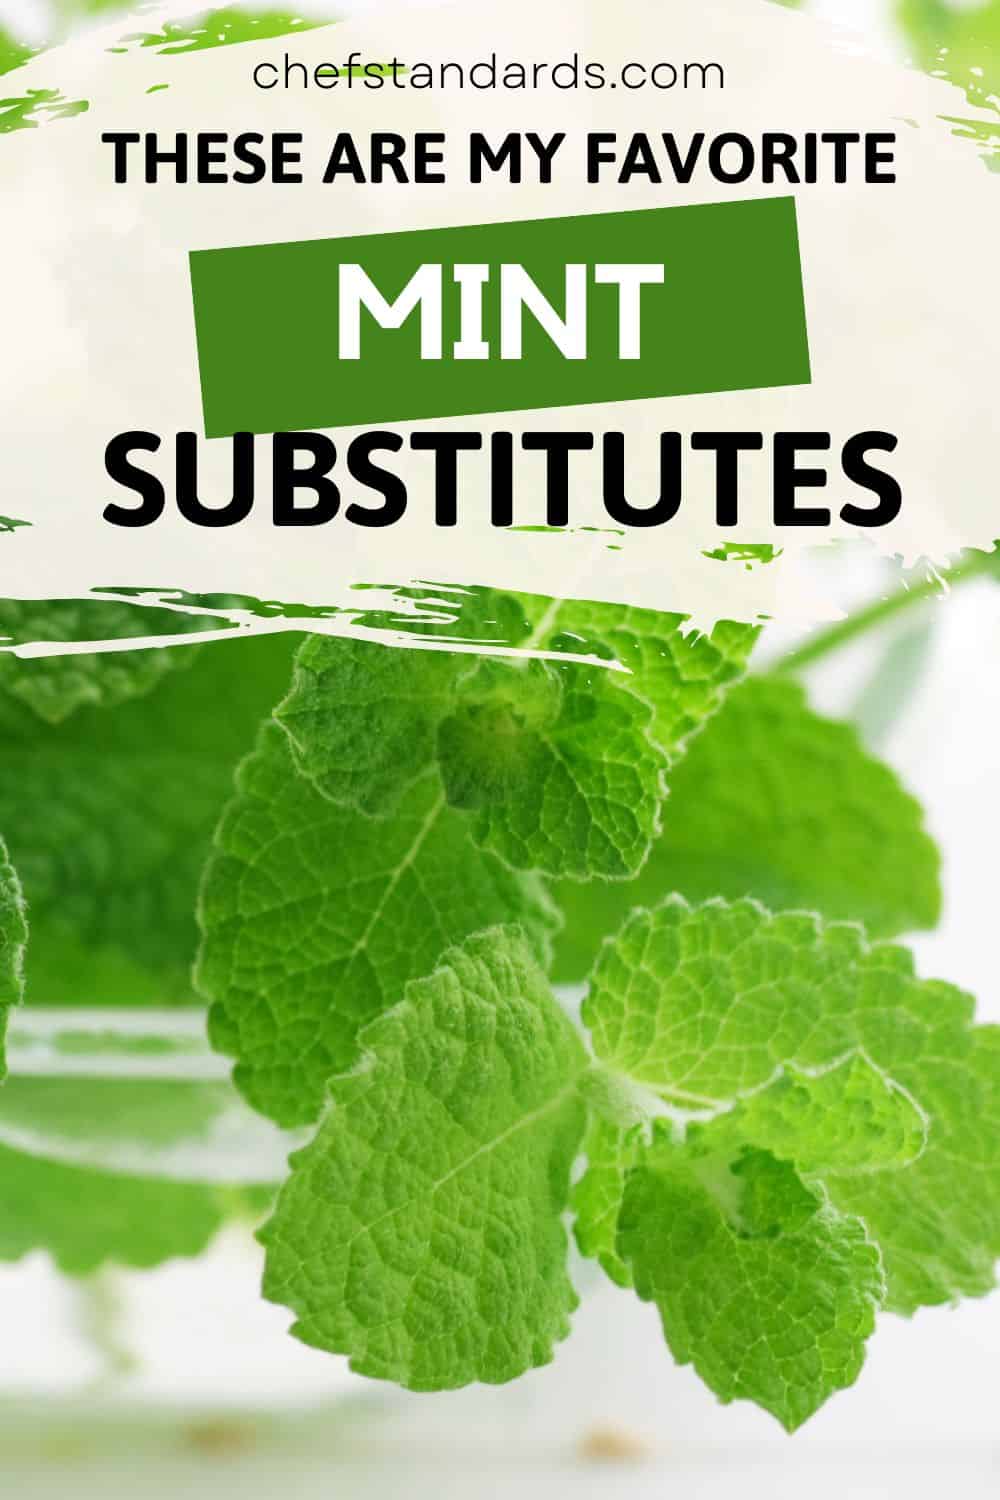 17 Refreshing Mint Substitute Ideas (Fresh + Dried Mint)